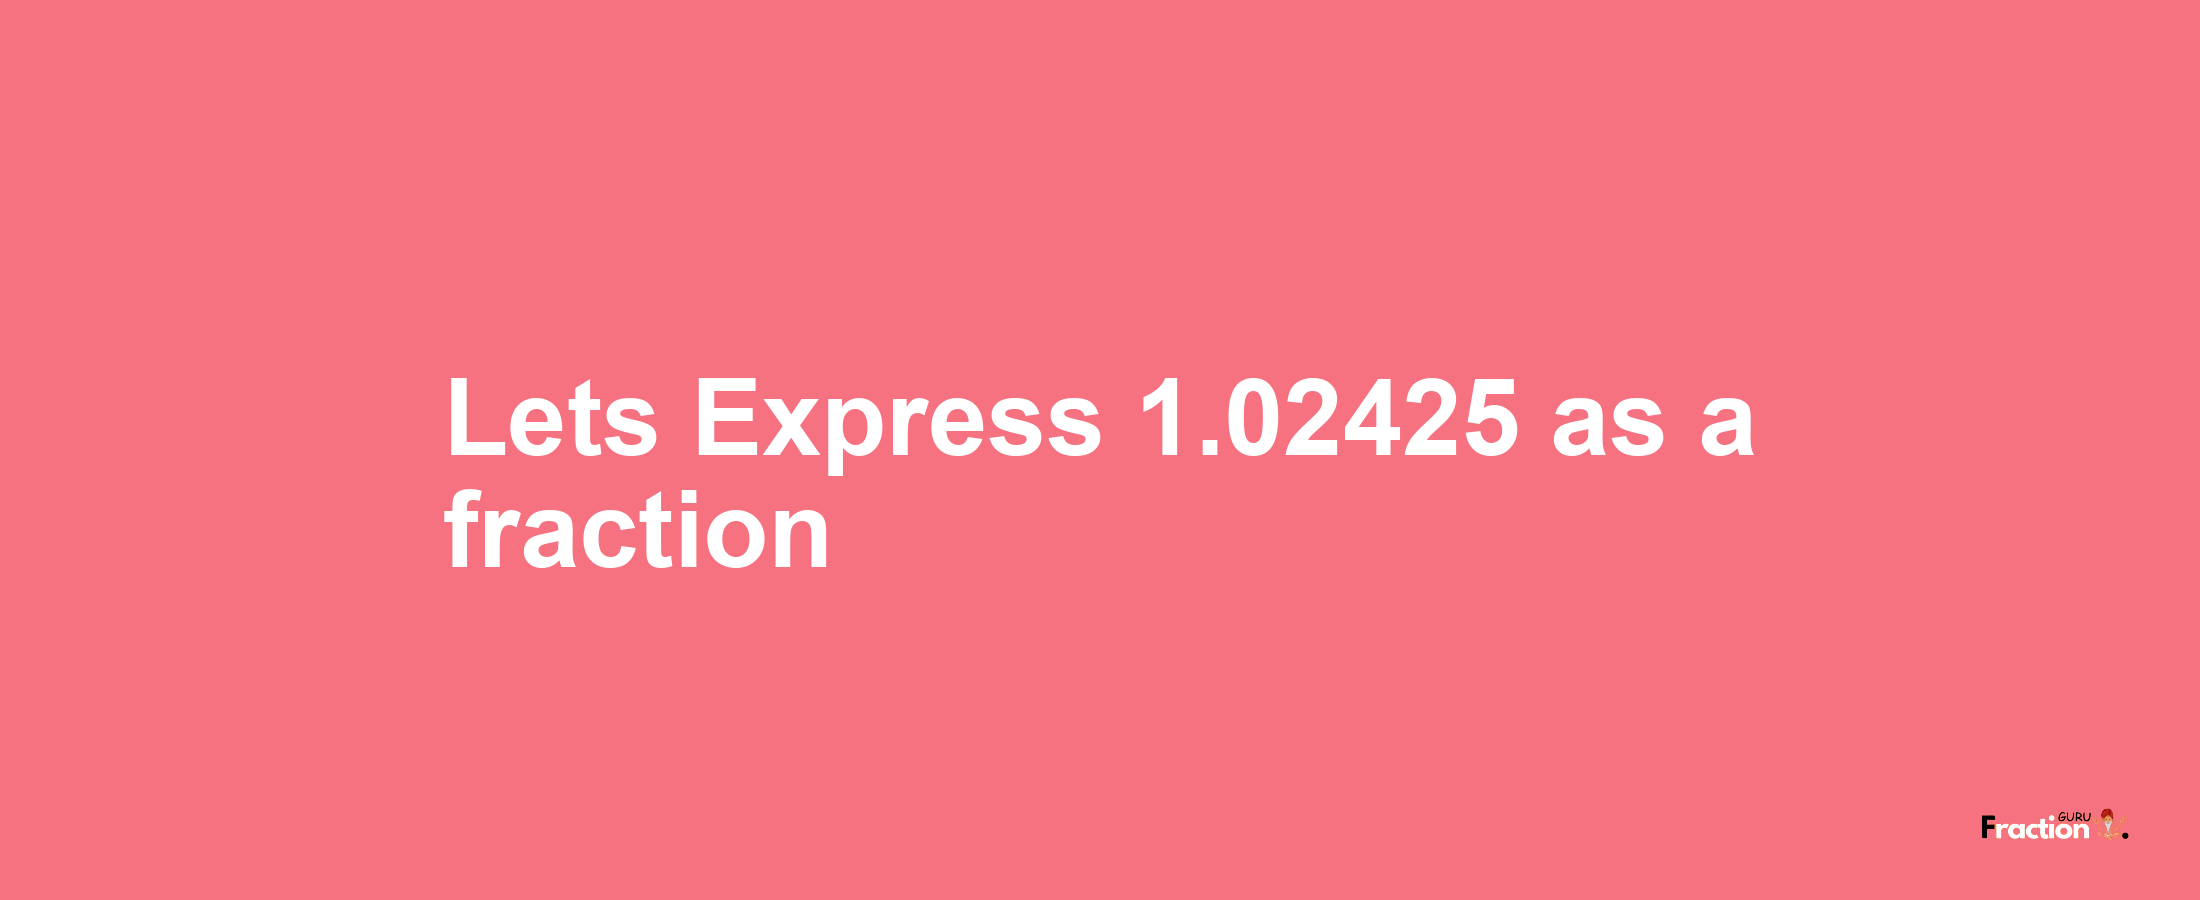 Lets Express 1.02425 as afraction